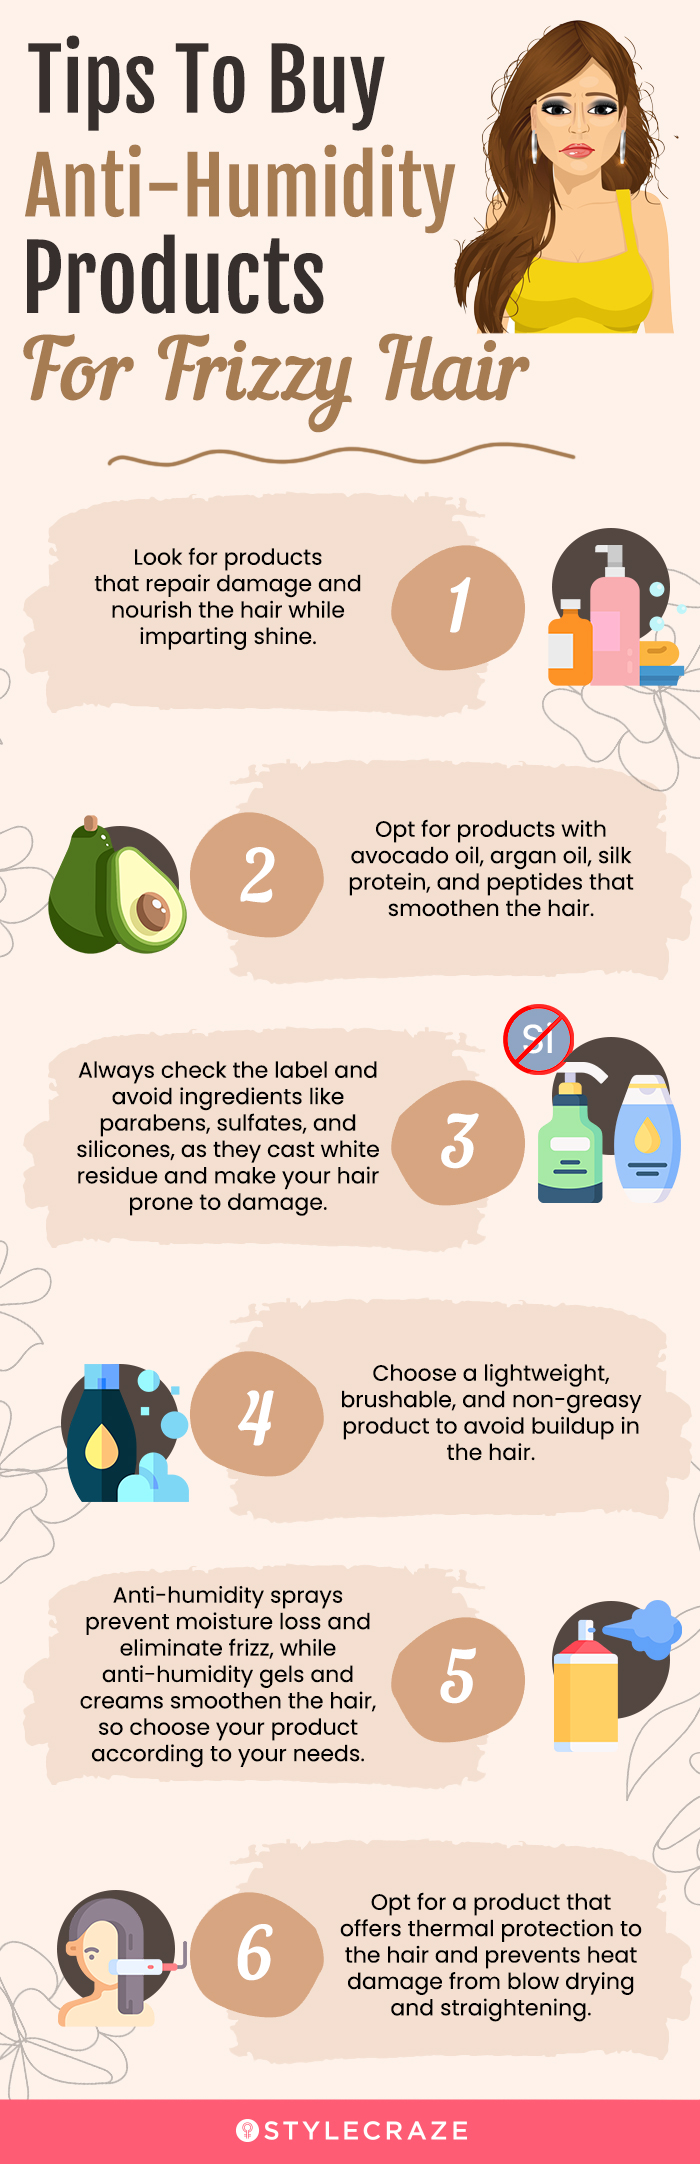 Tips To Buy Anti-Humidity Products For Frizzy Hair (infographic)